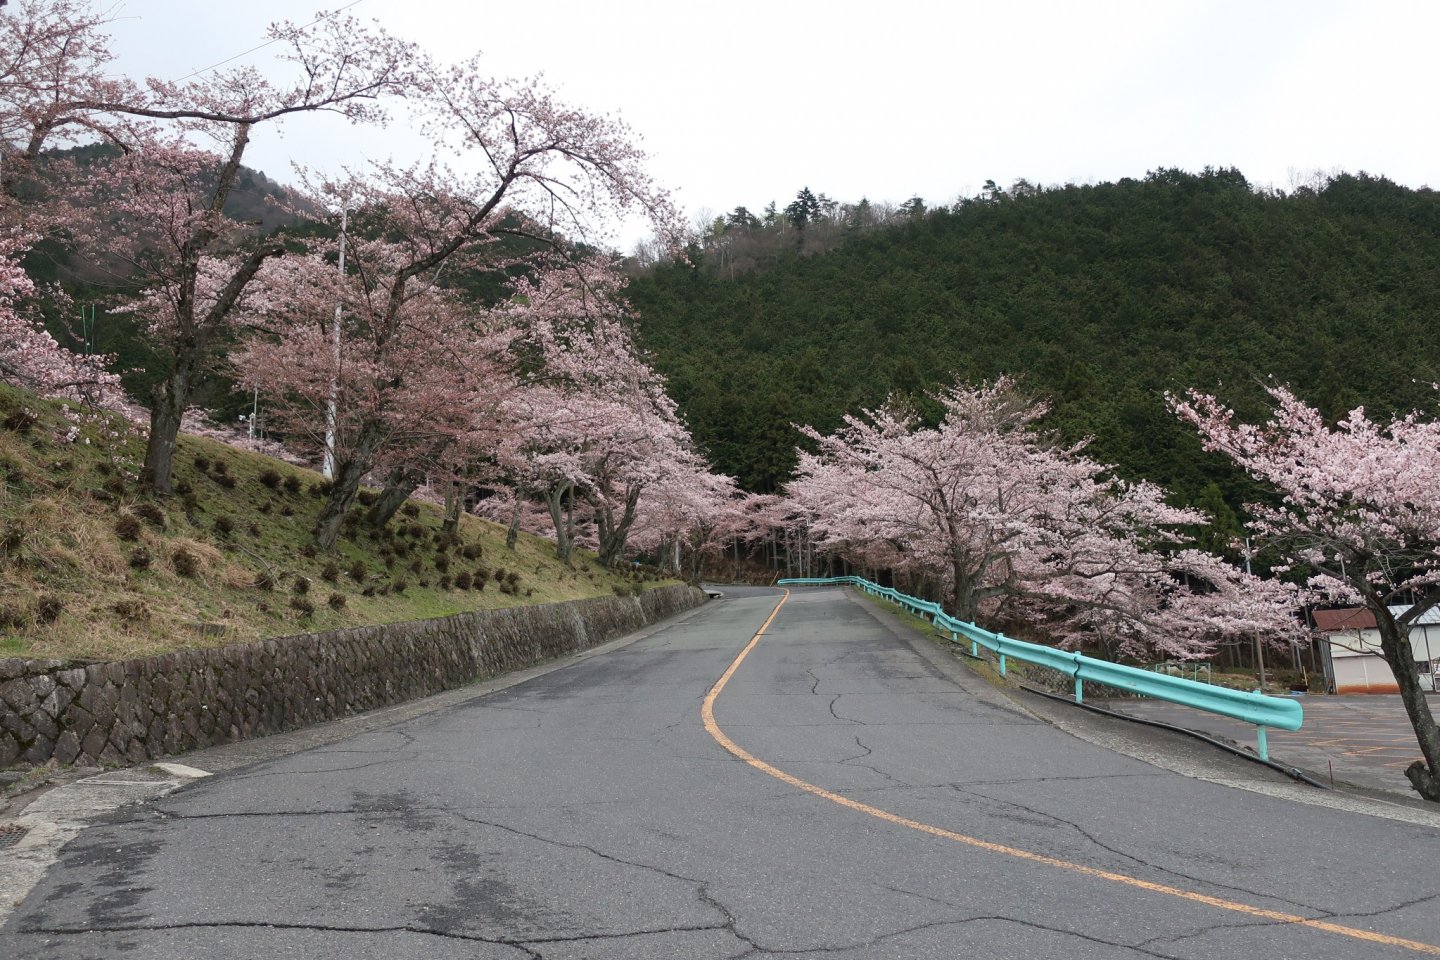 Cherry blossoms along the drive to the ropeway